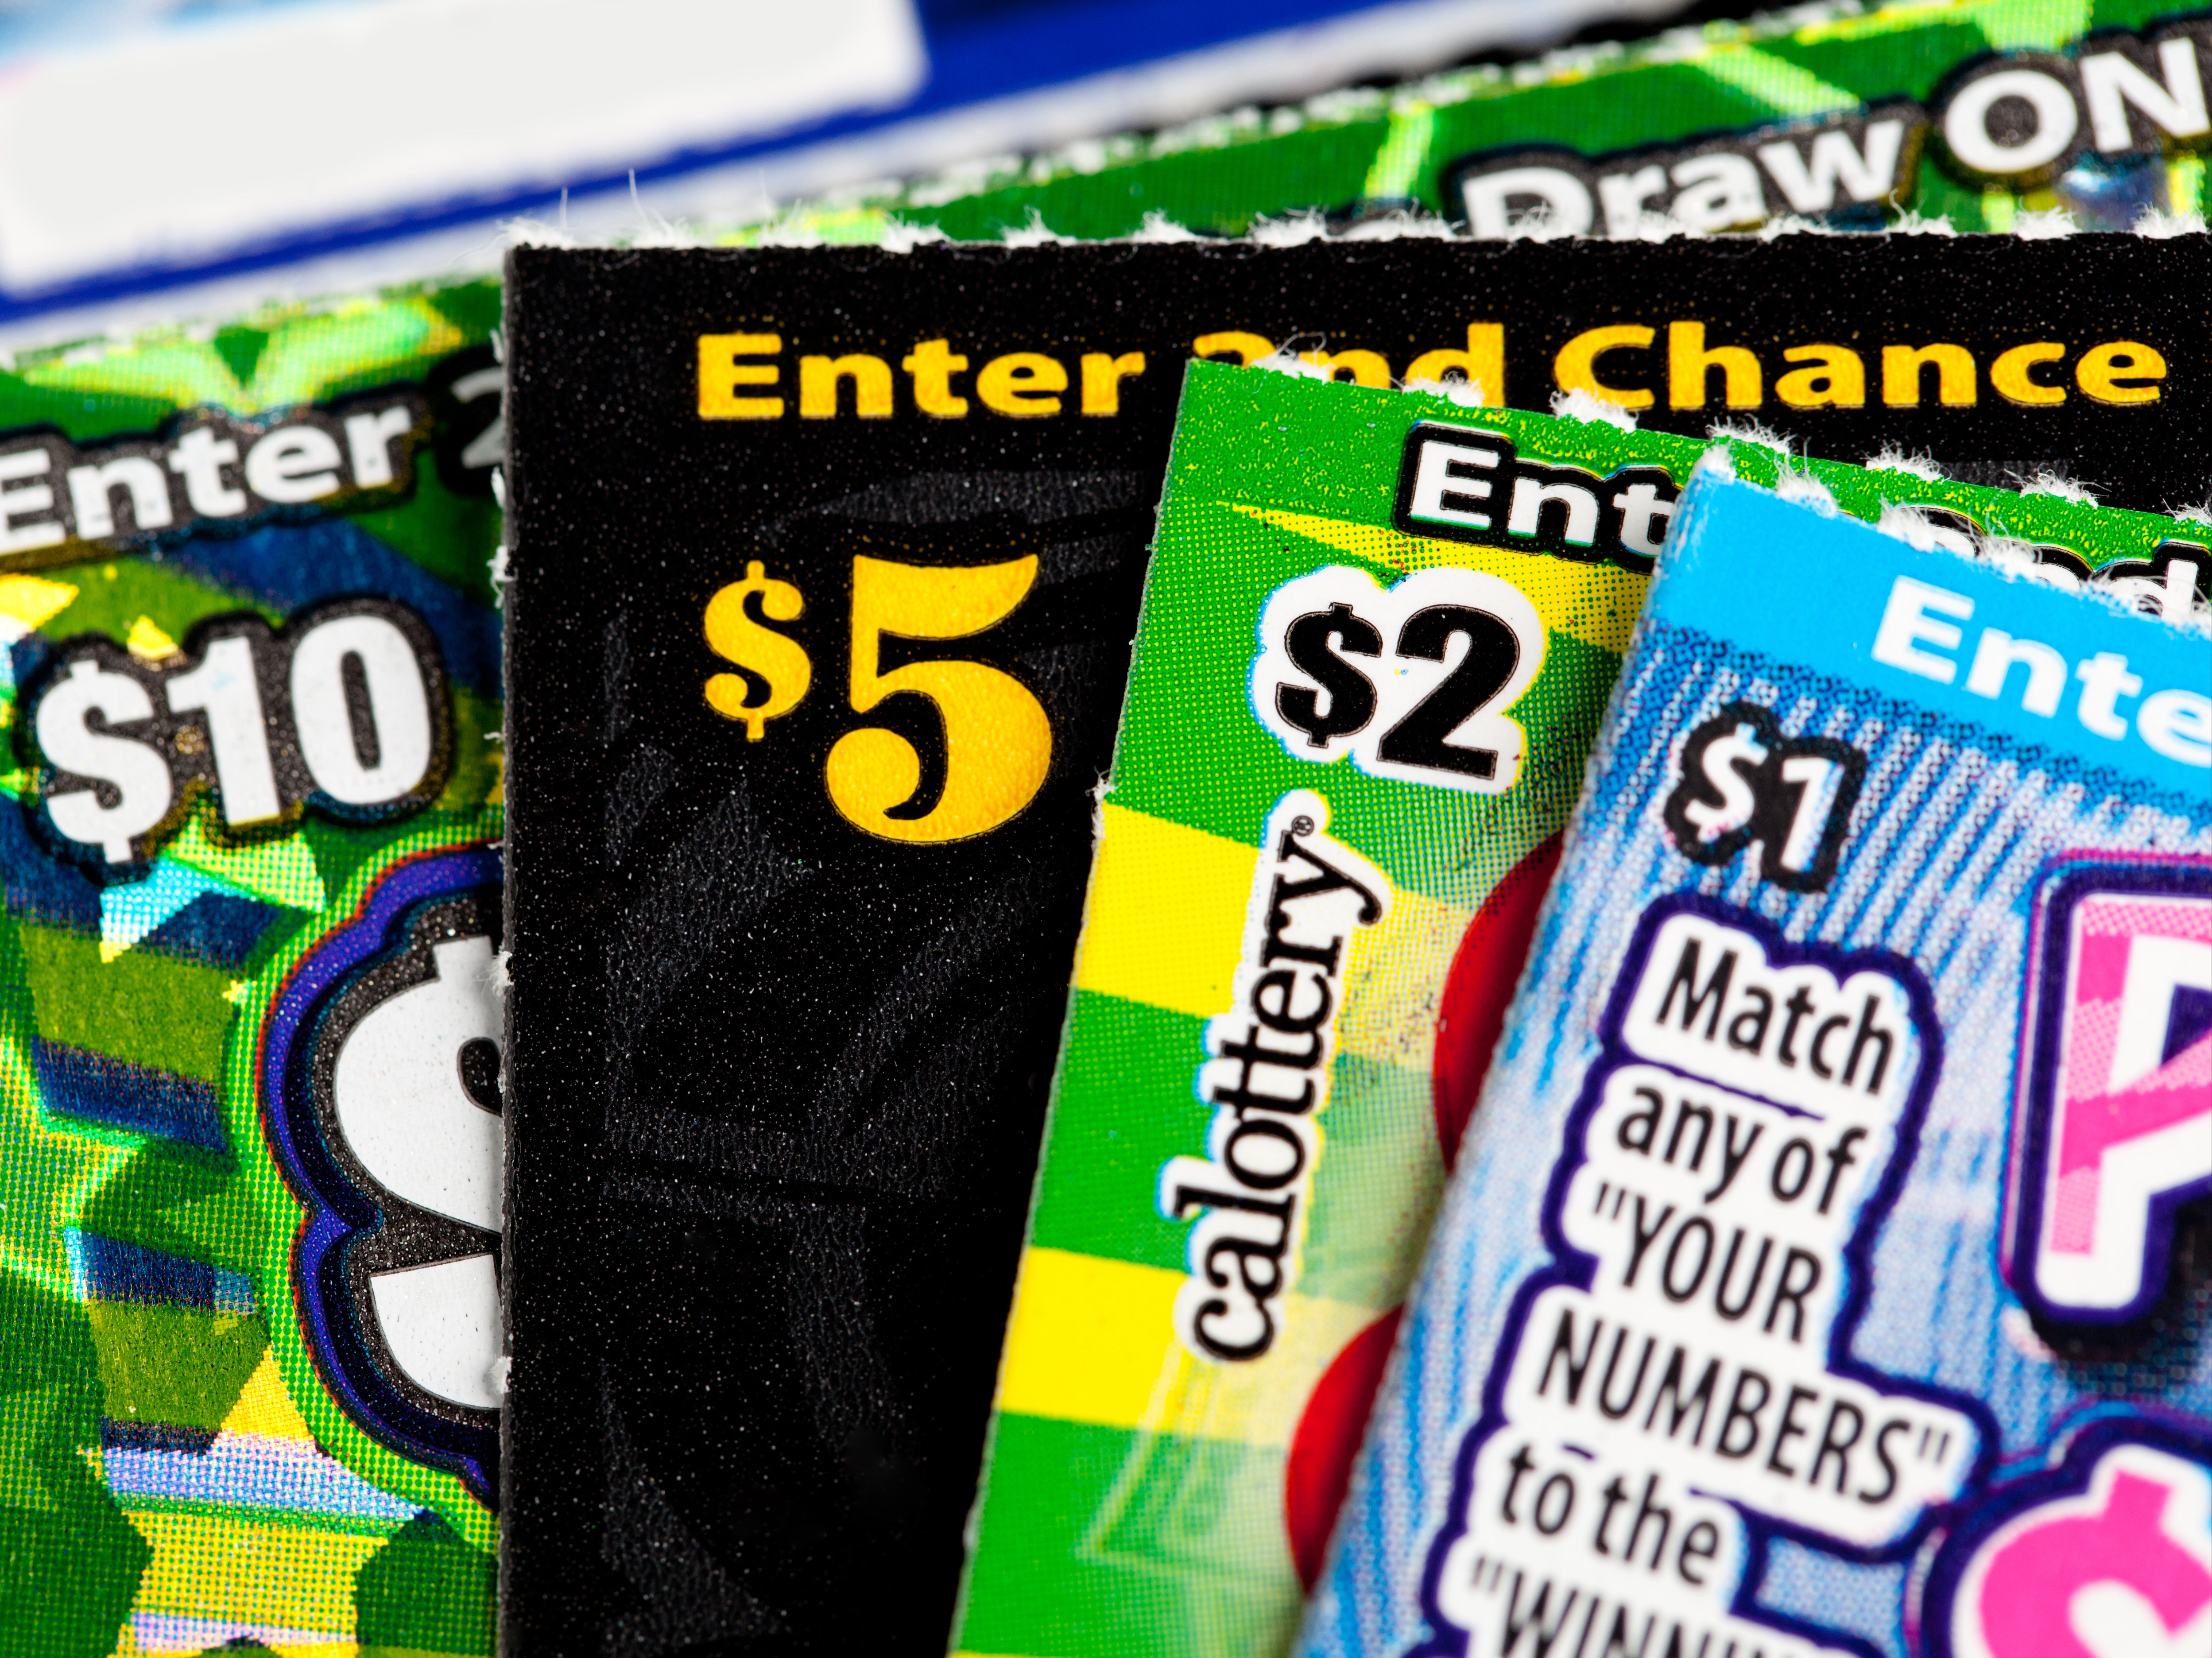 Representational image: California lottery tickets are listed at $1-10 a piece